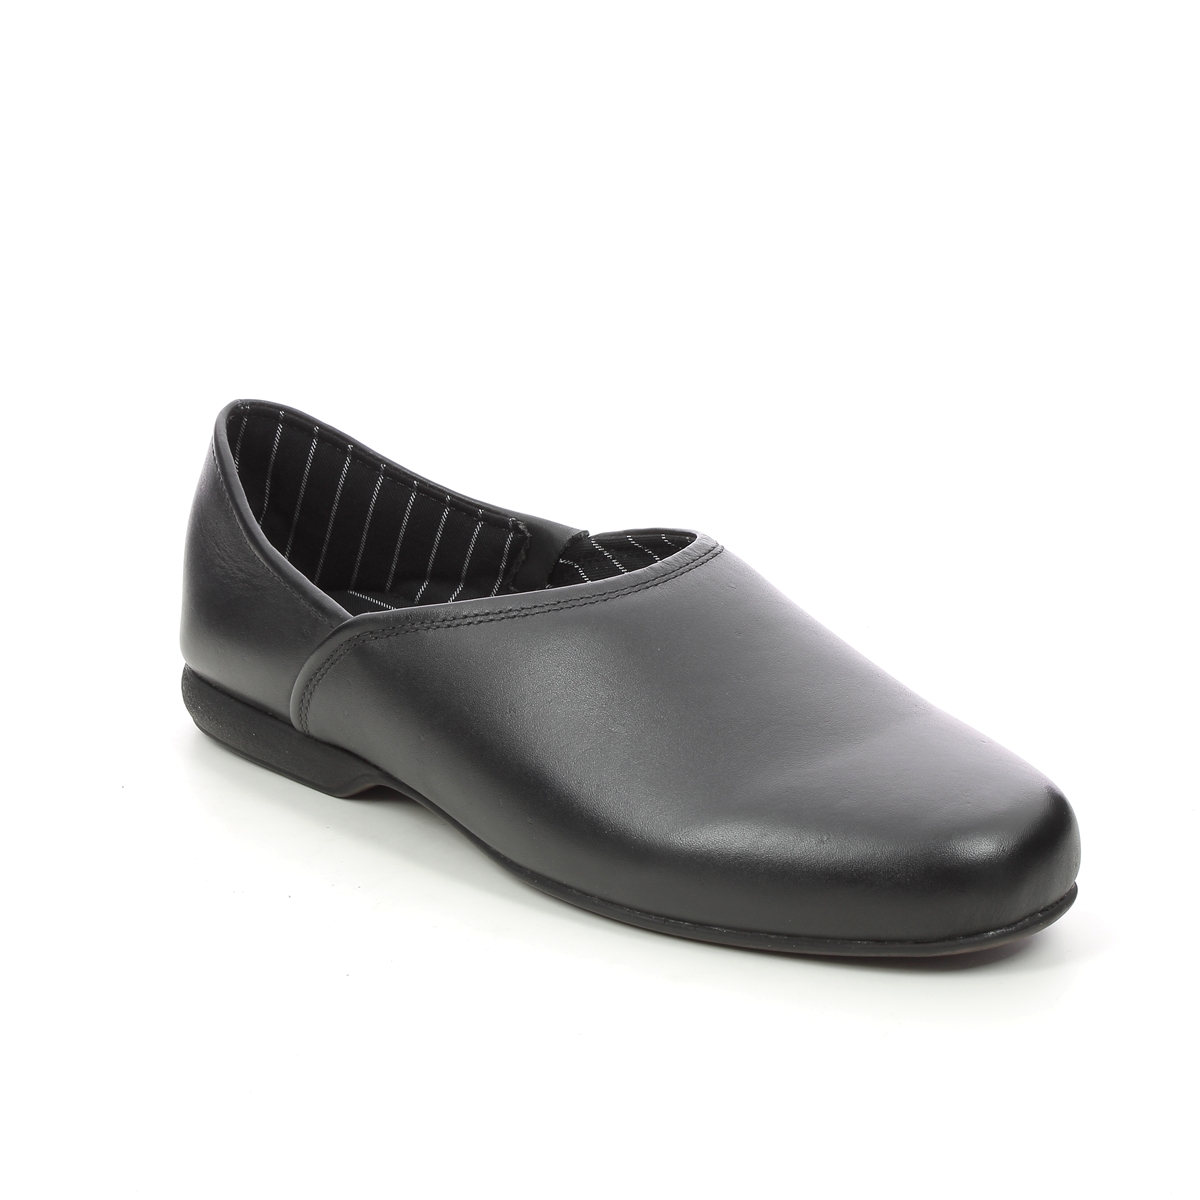 Clarks Harston Elite Black Leather Mens Slippers 447207G In Size 7 In Plain Black Leather G Width Fitting